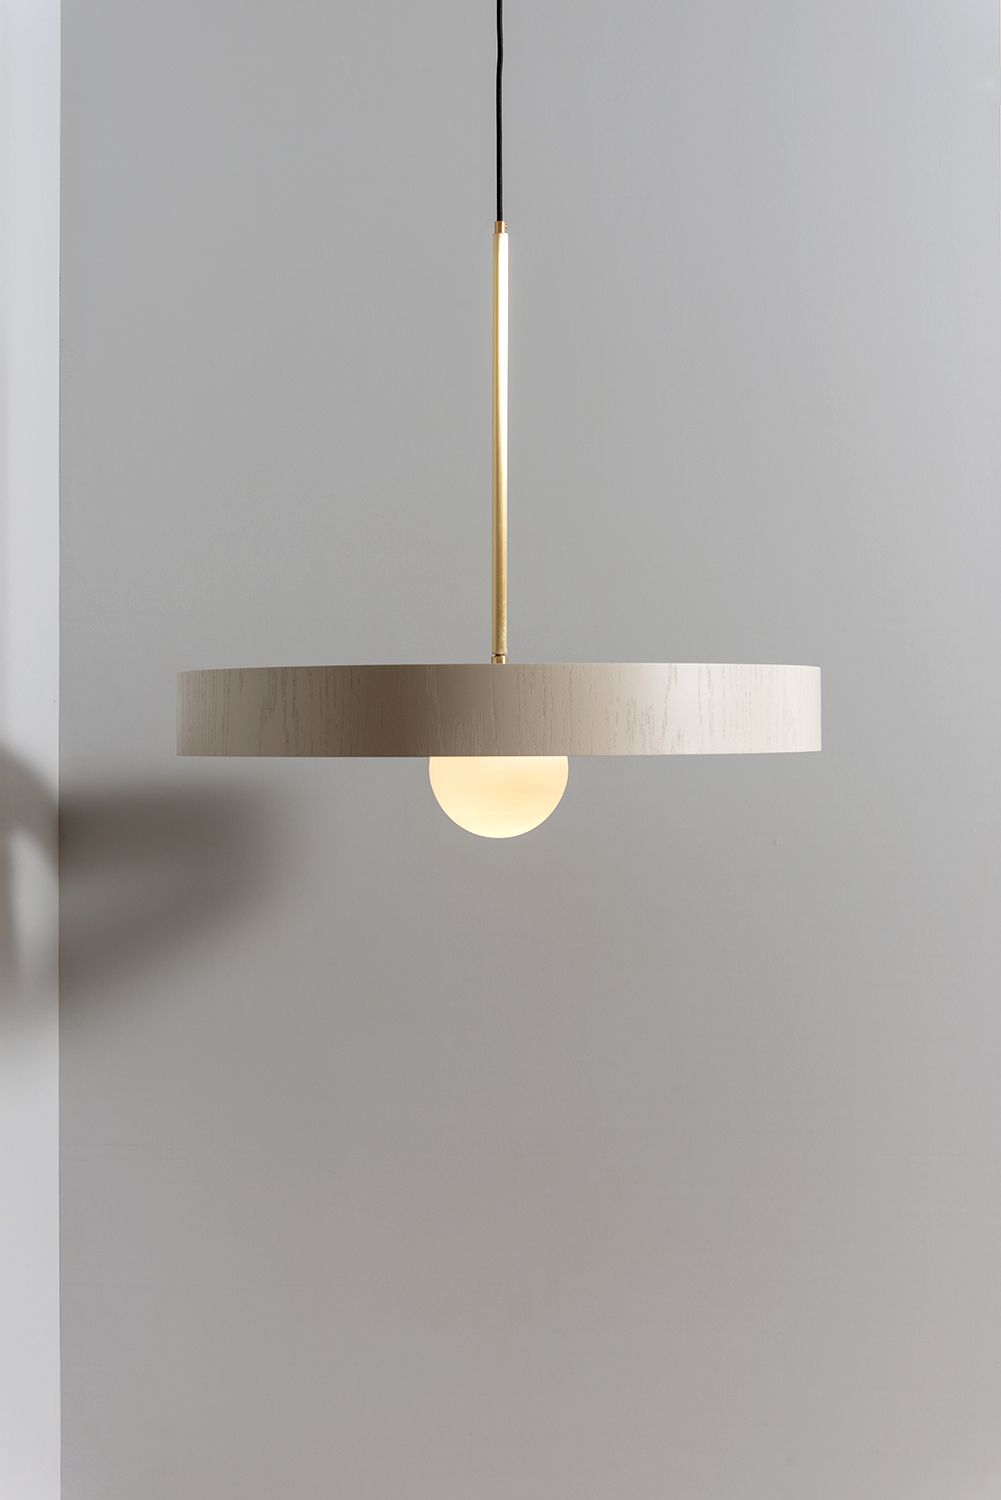 Asaf Weinbroom's Latest Lighting Collection | Yellowtrace